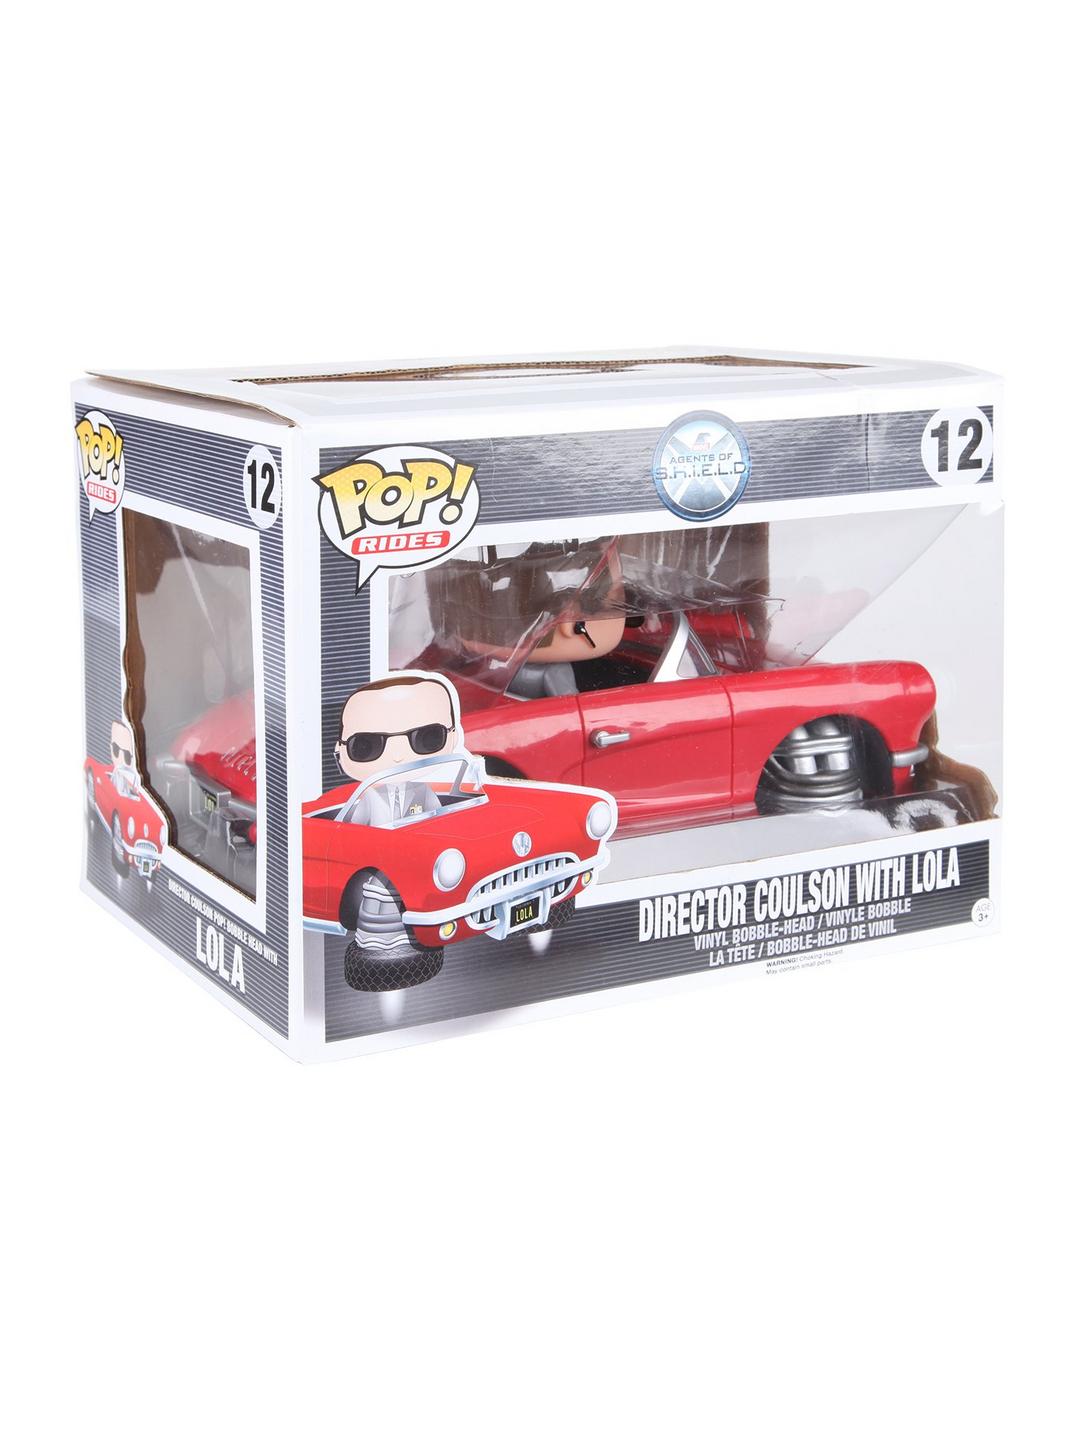 Funko Marvel Agents Of S.H.I.E.L.D. Pop! Rides Director Coulson With Lola Vinyl Vehicle, , hi-res